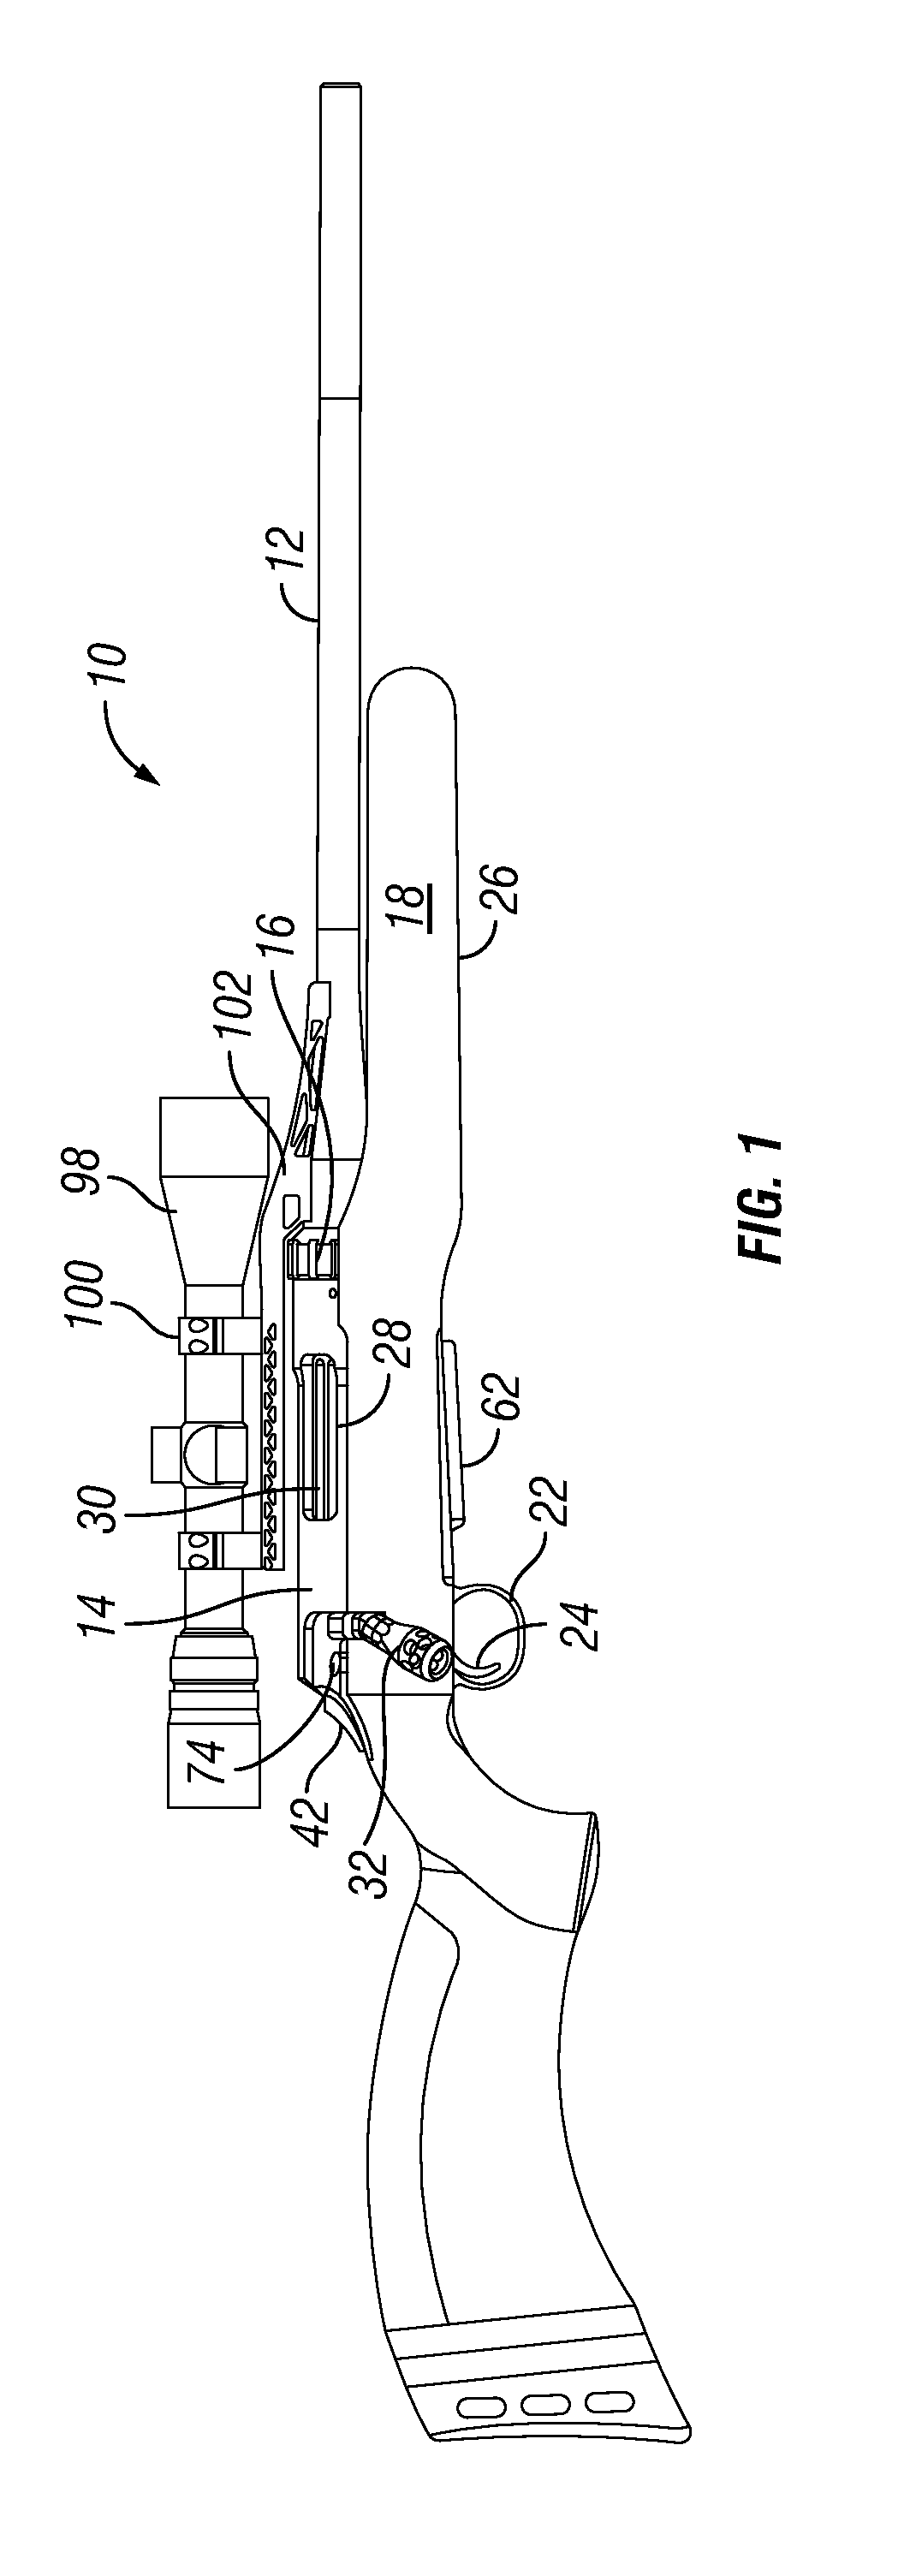 Multi-caliber bolt-action rifle and components